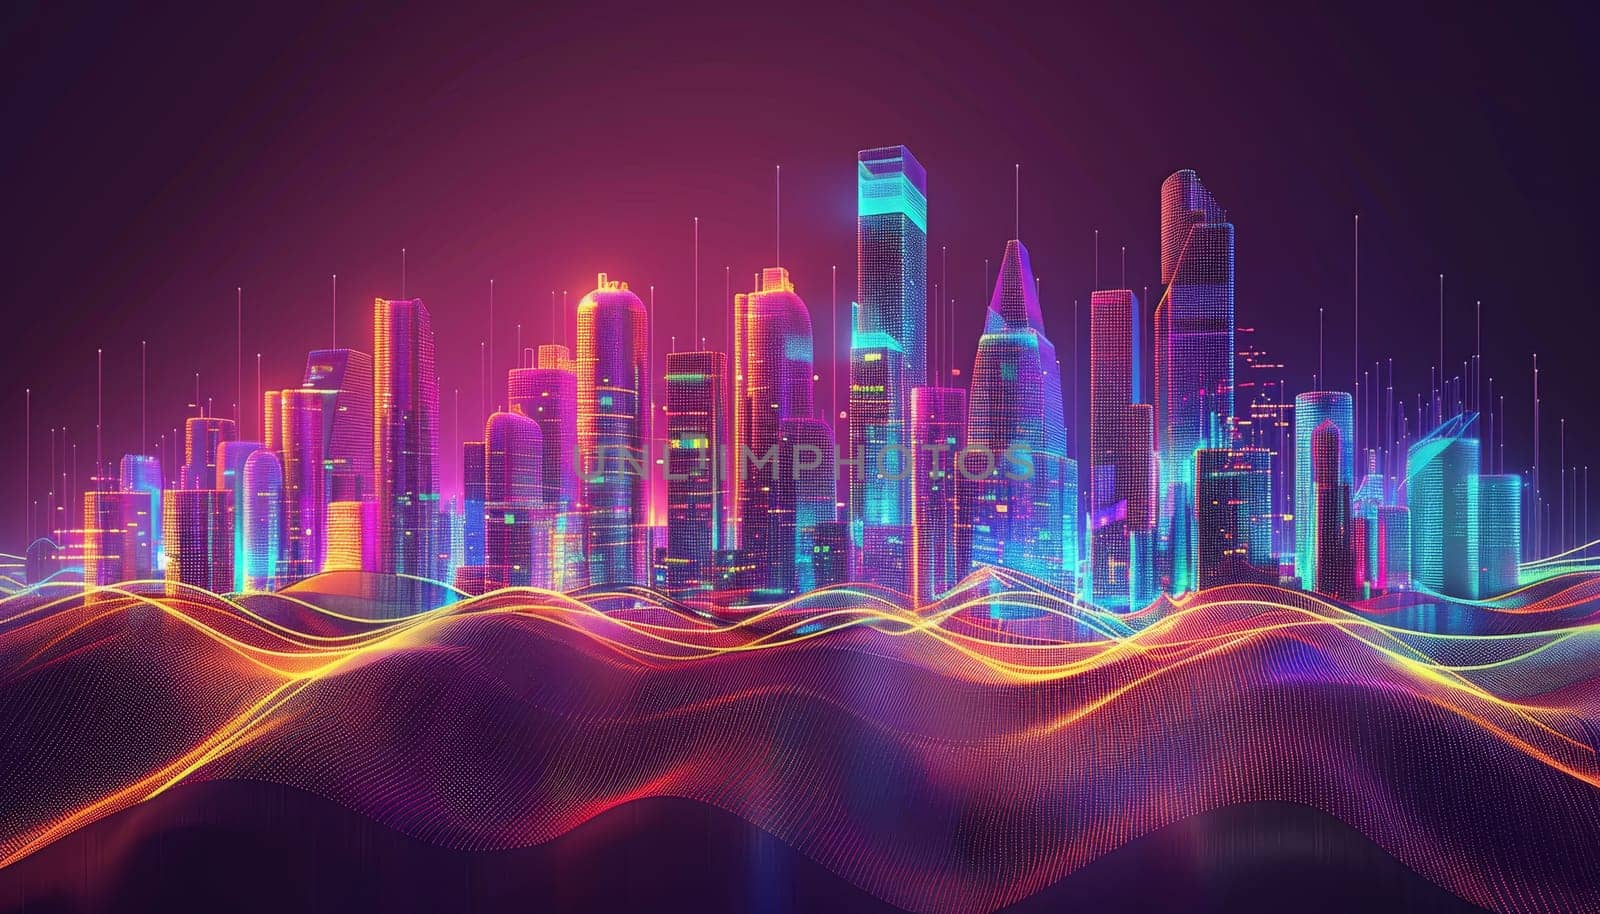 A city skyline is shown in a neon color scheme. The buildings are tall and the city appears to be in a futuristic setting. The colors are bright and vibrant, giving the impression of a bustling